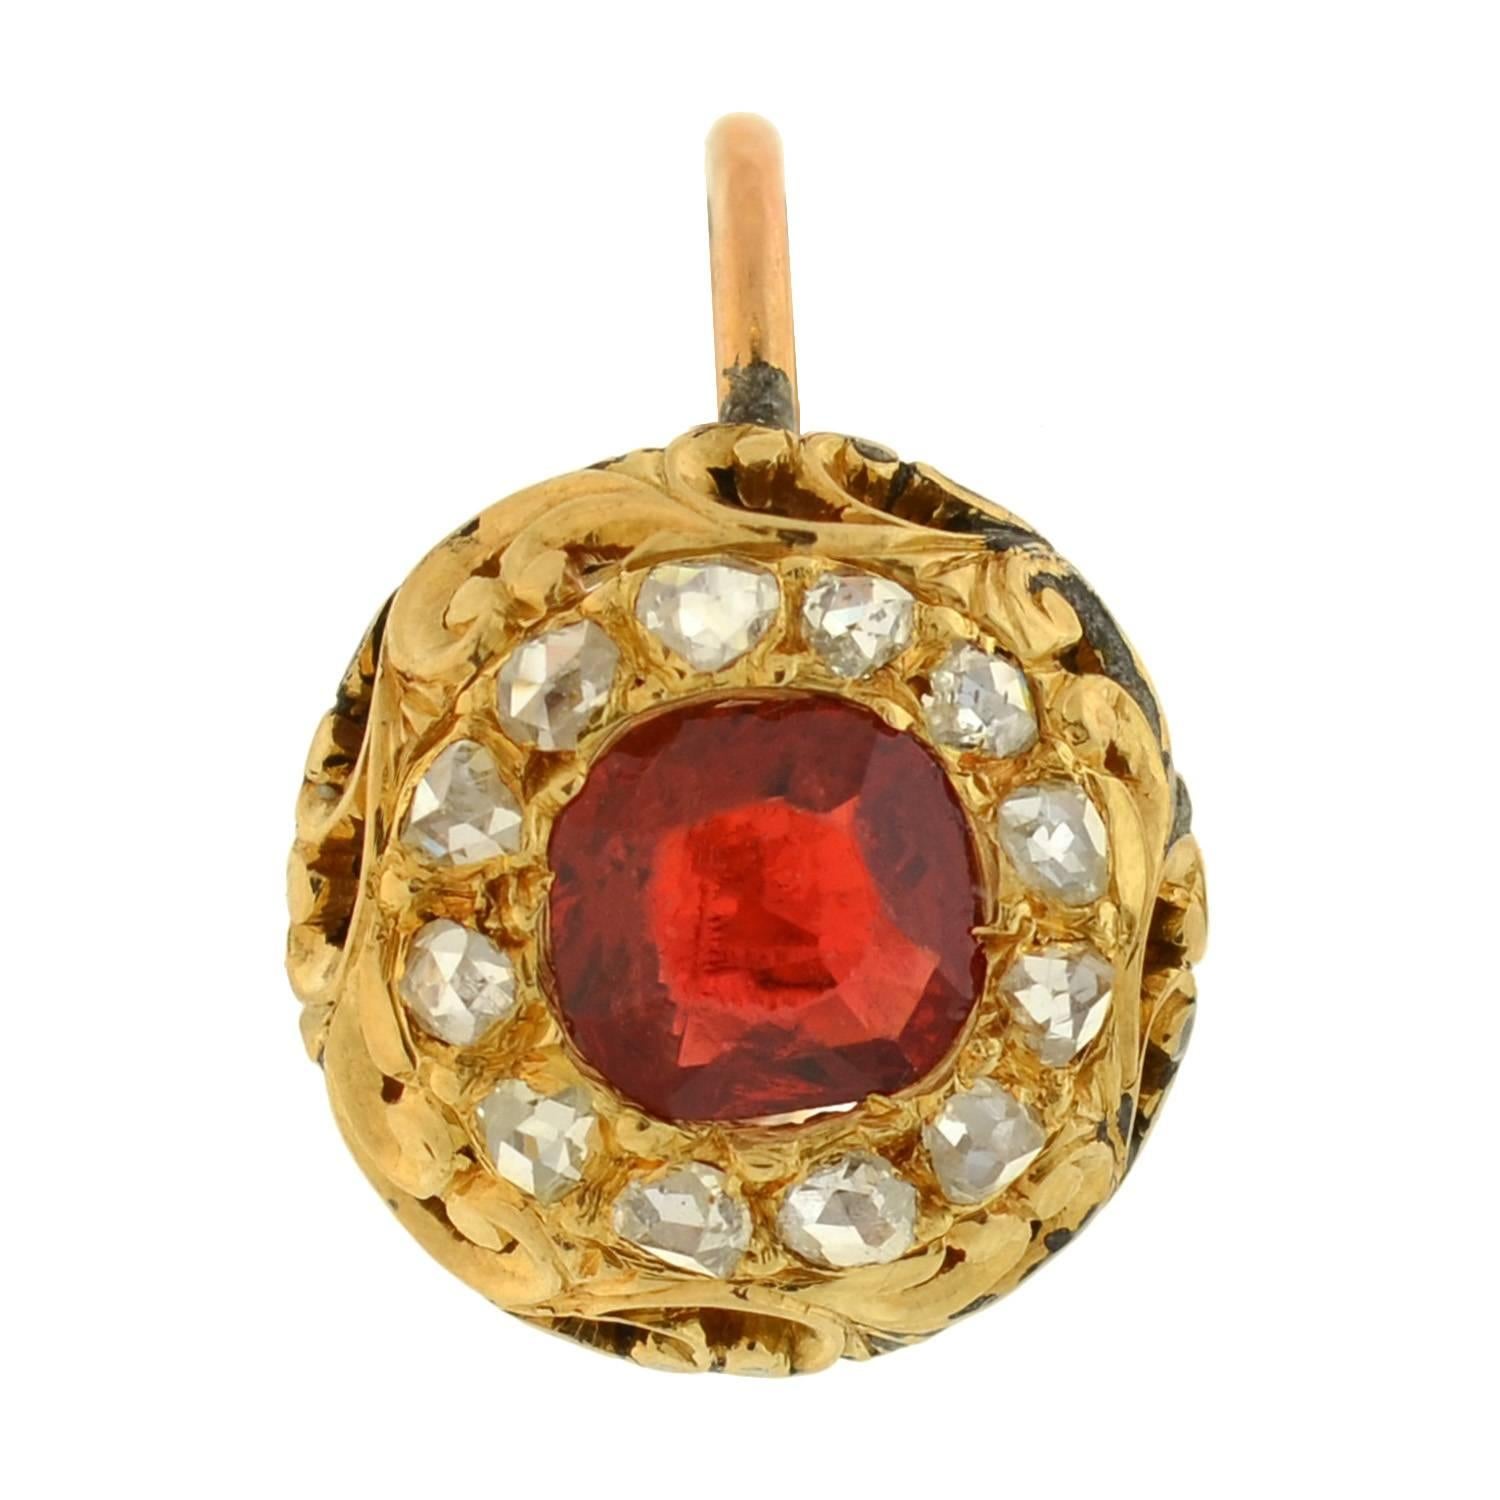 A gorgeous pair of spinel and diamond earrings from the Victorian era (1880)! Each 14kt gold earring frames a luscious red spinel at the center of a rose cut diamond halo. One of the spinels is a Cushion Cut stone, while the other is a Modified